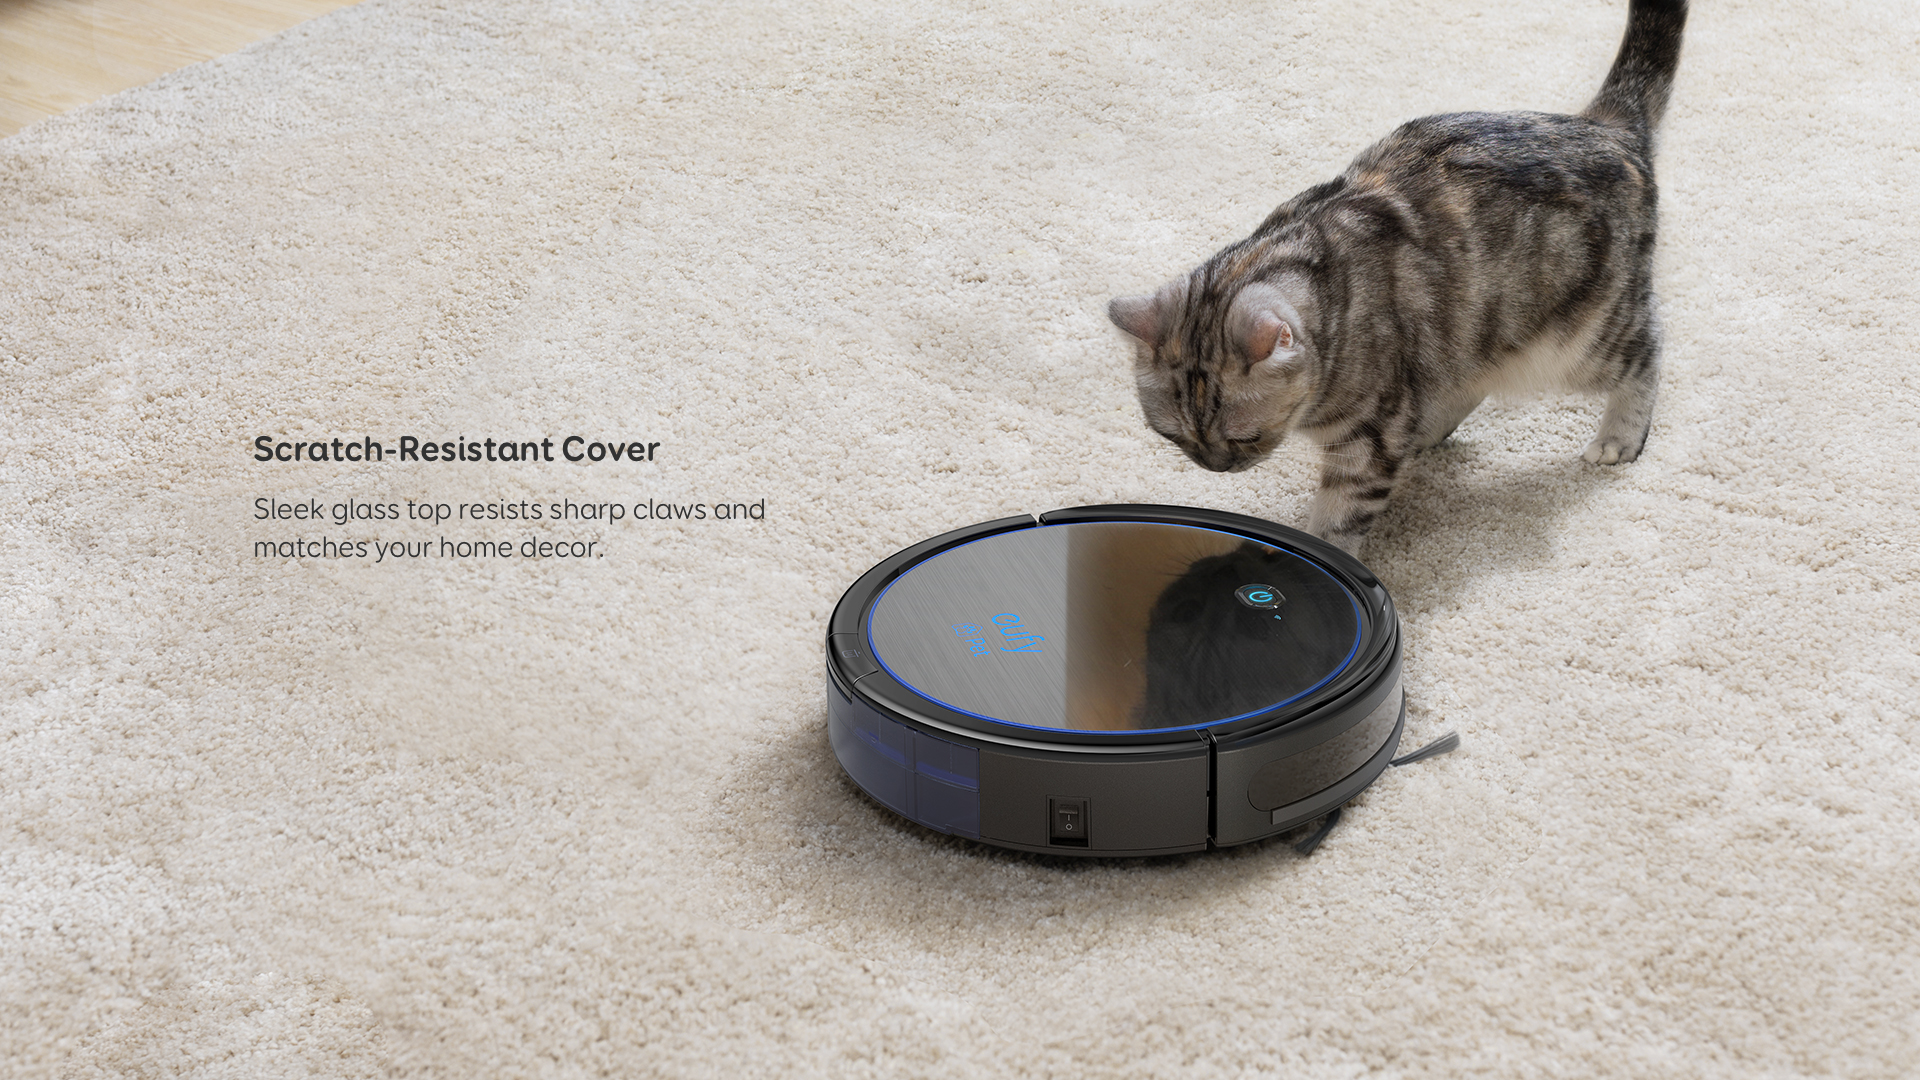 Anker eufy RoboVac 11c Pet Edition Wi-Fi Connected Robot Vacuum - image 4 of 9